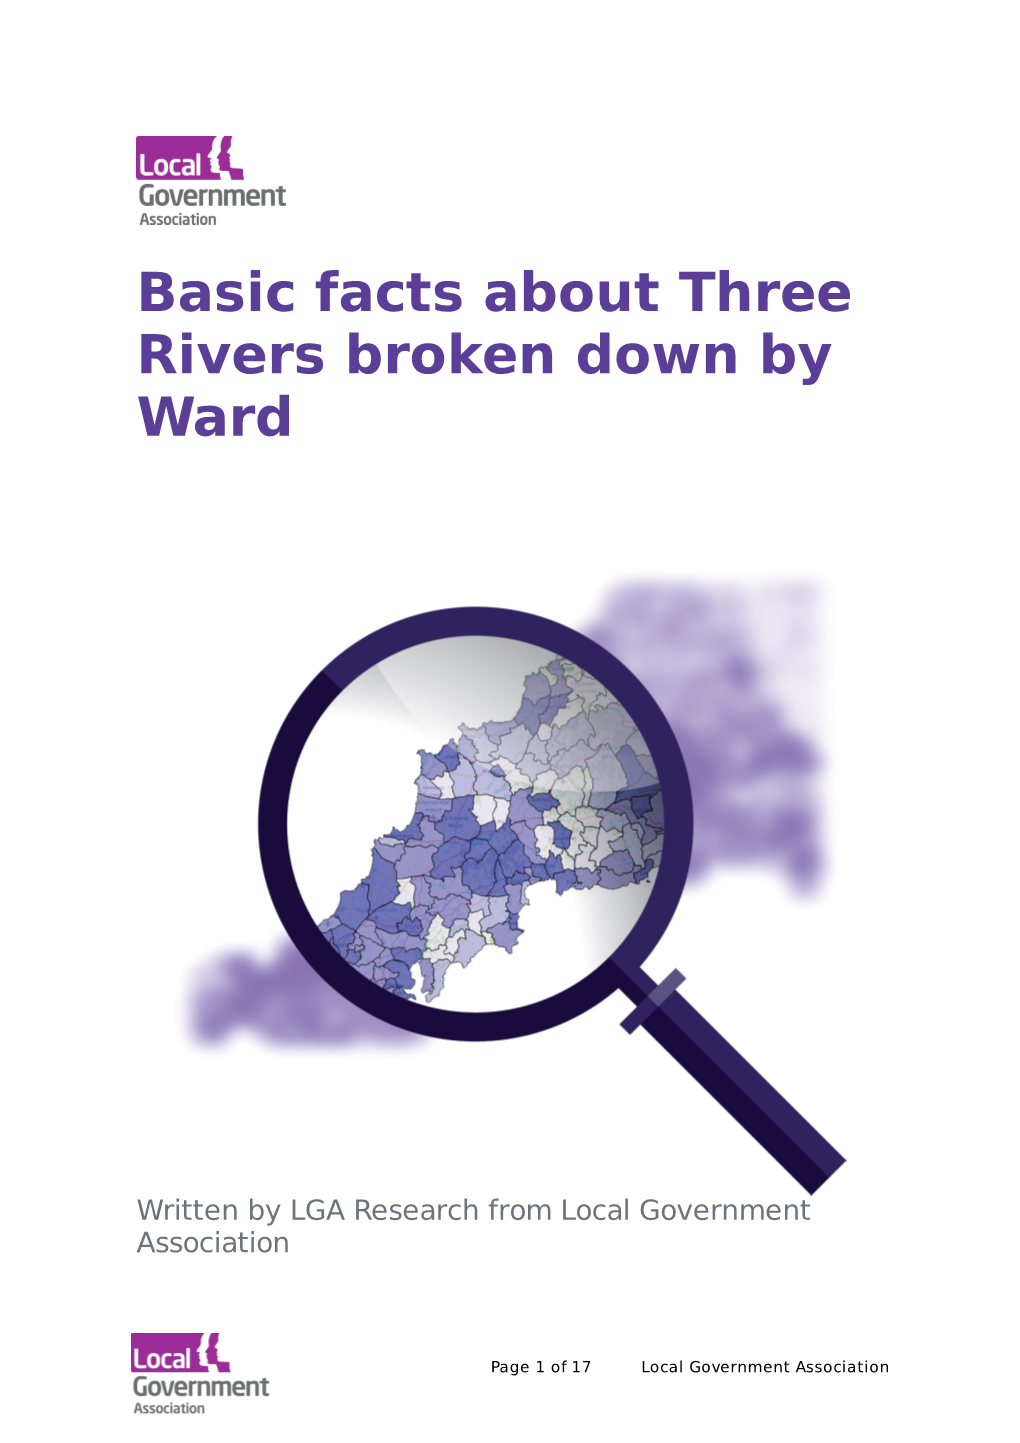 Basic Facts About Three Rivers Broken Down by Ward